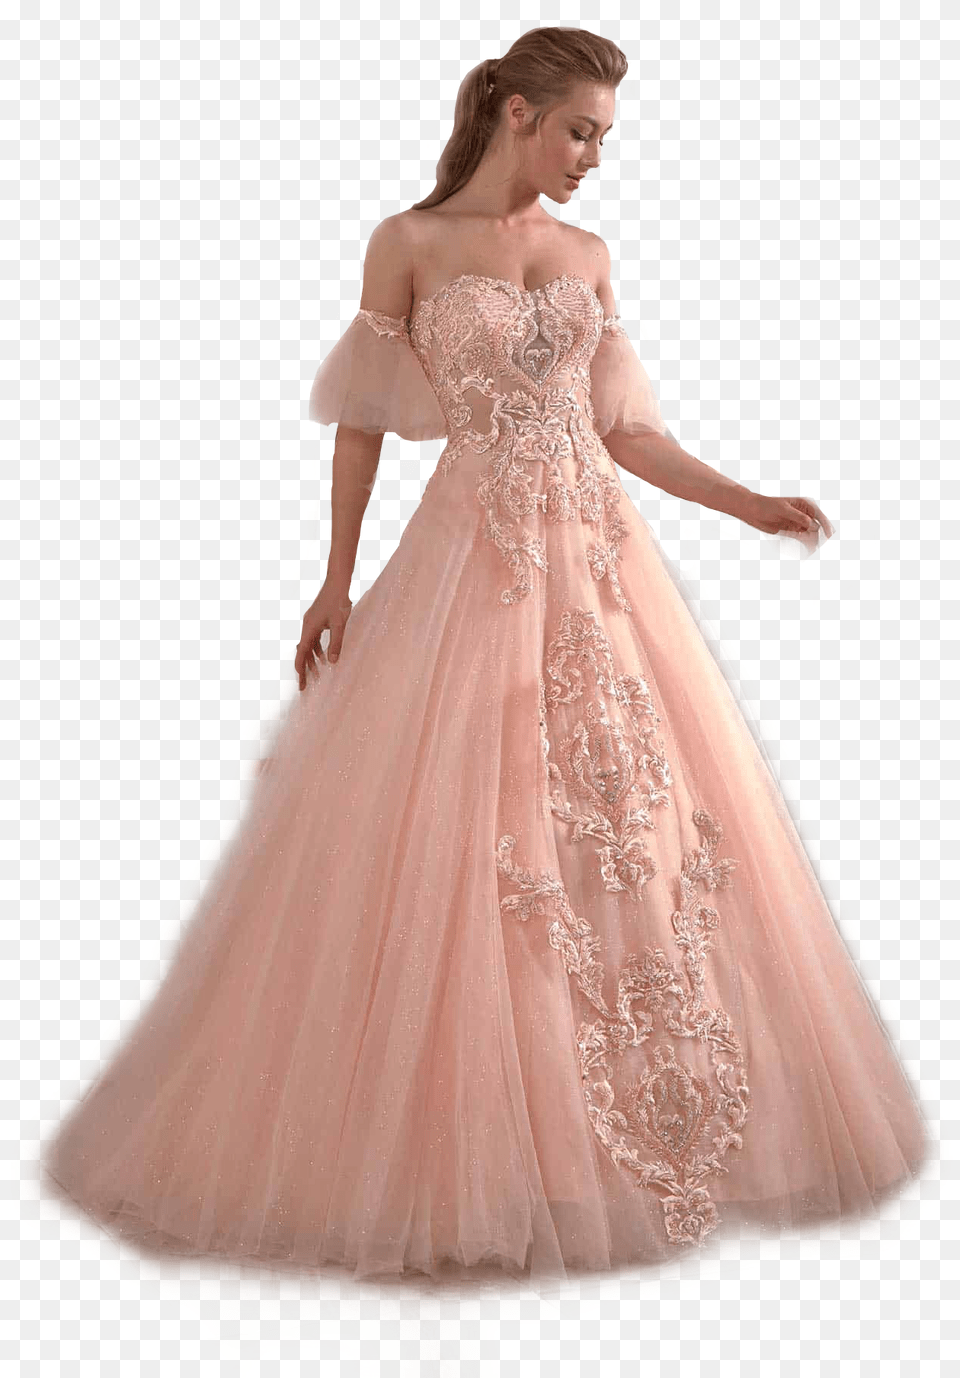 Prom Dress Pink Formal Gown Pinkaesthetic Aesthetic Gown, Wedding Gown, Clothing, Wedding, Fashion Png Image